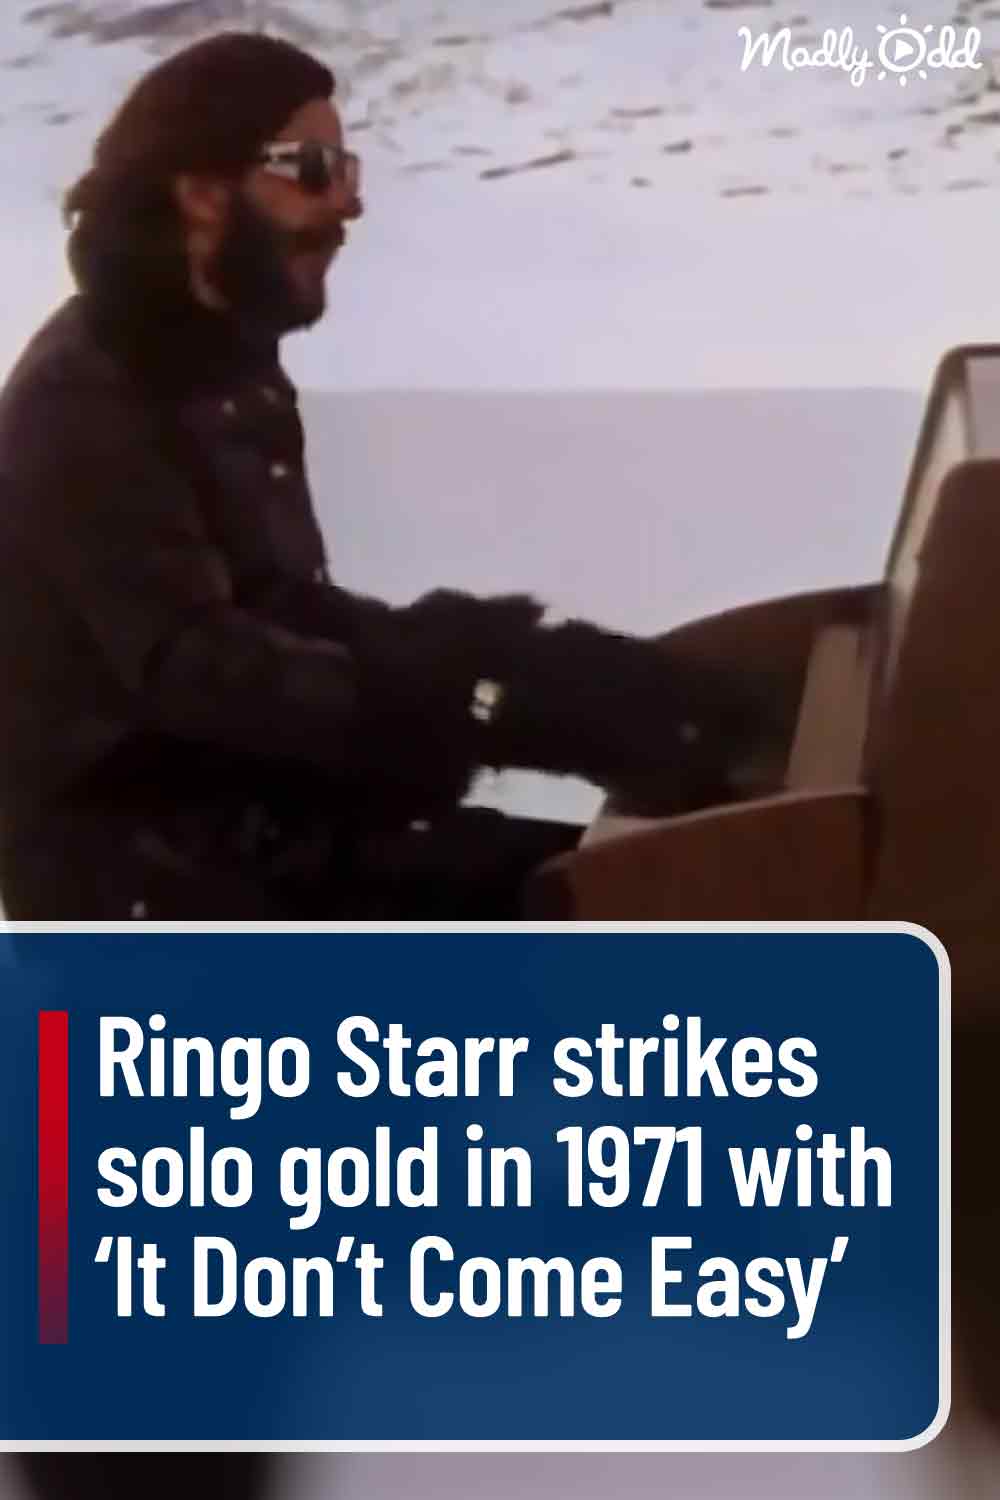 Ringo Starr strikes solo gold in 1971 with ‘It Don’t Come Easy’